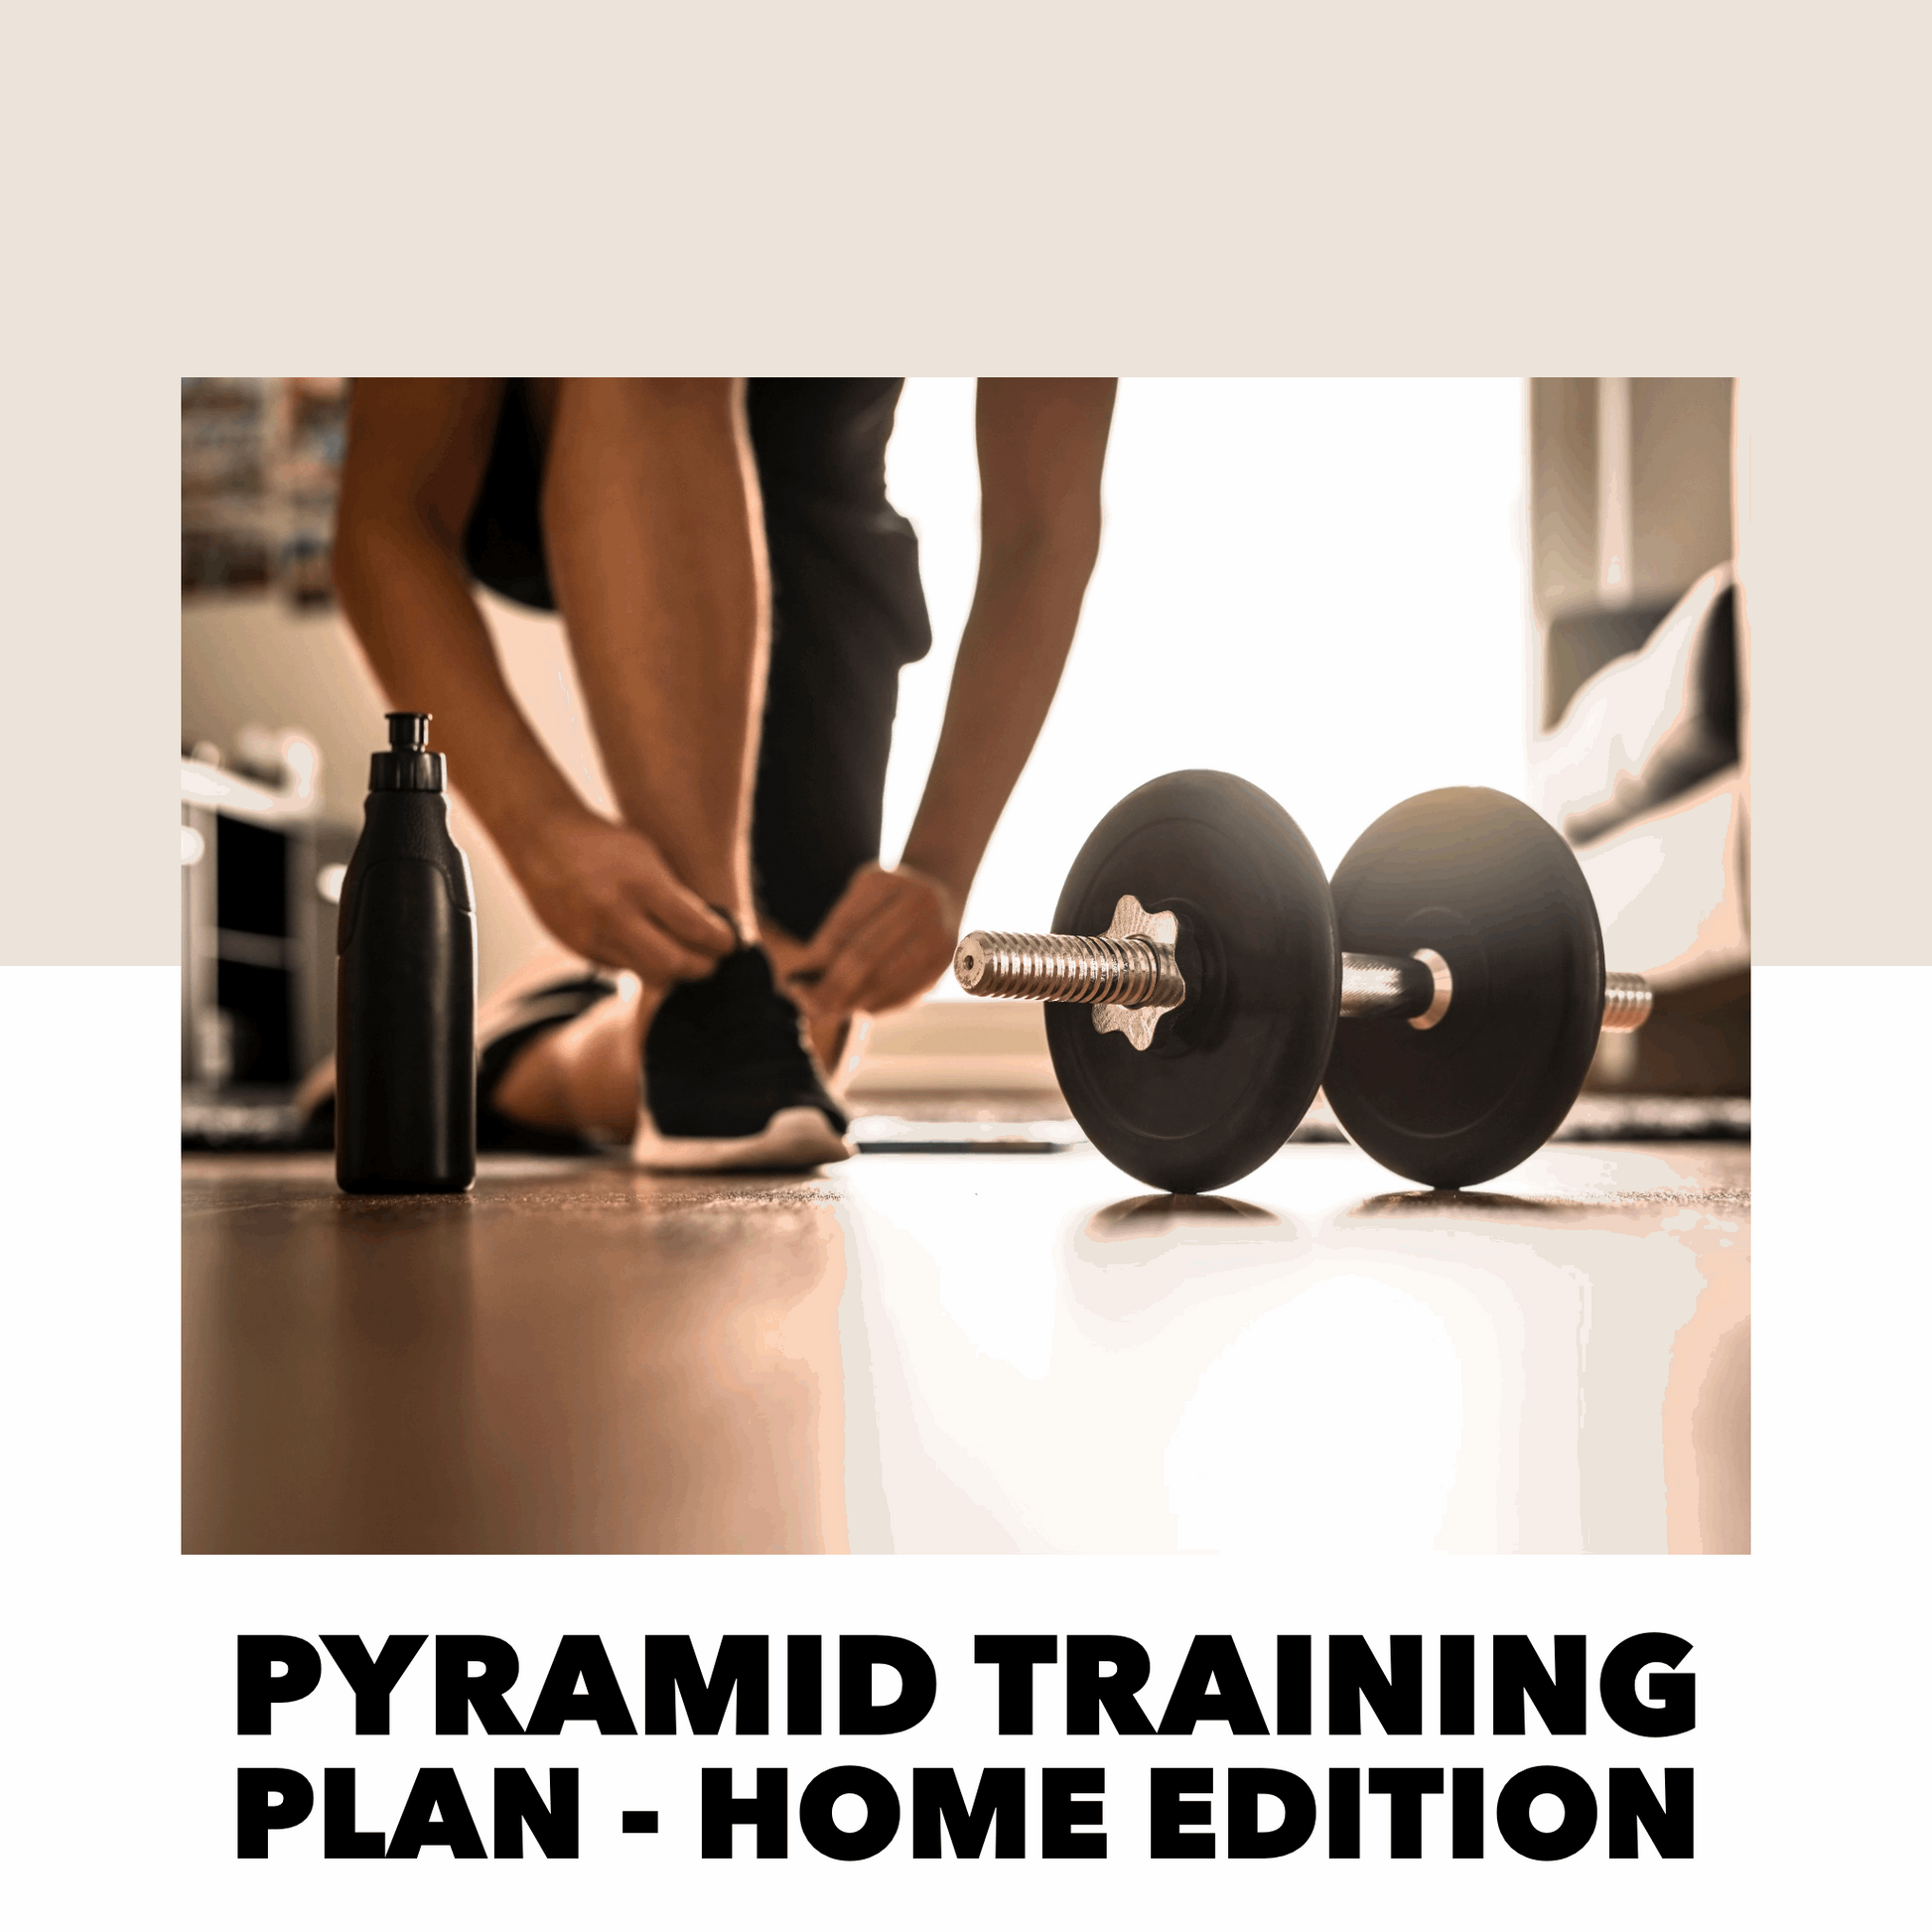 Pyramid Training Plan For Home - Barbells and Dumbbells